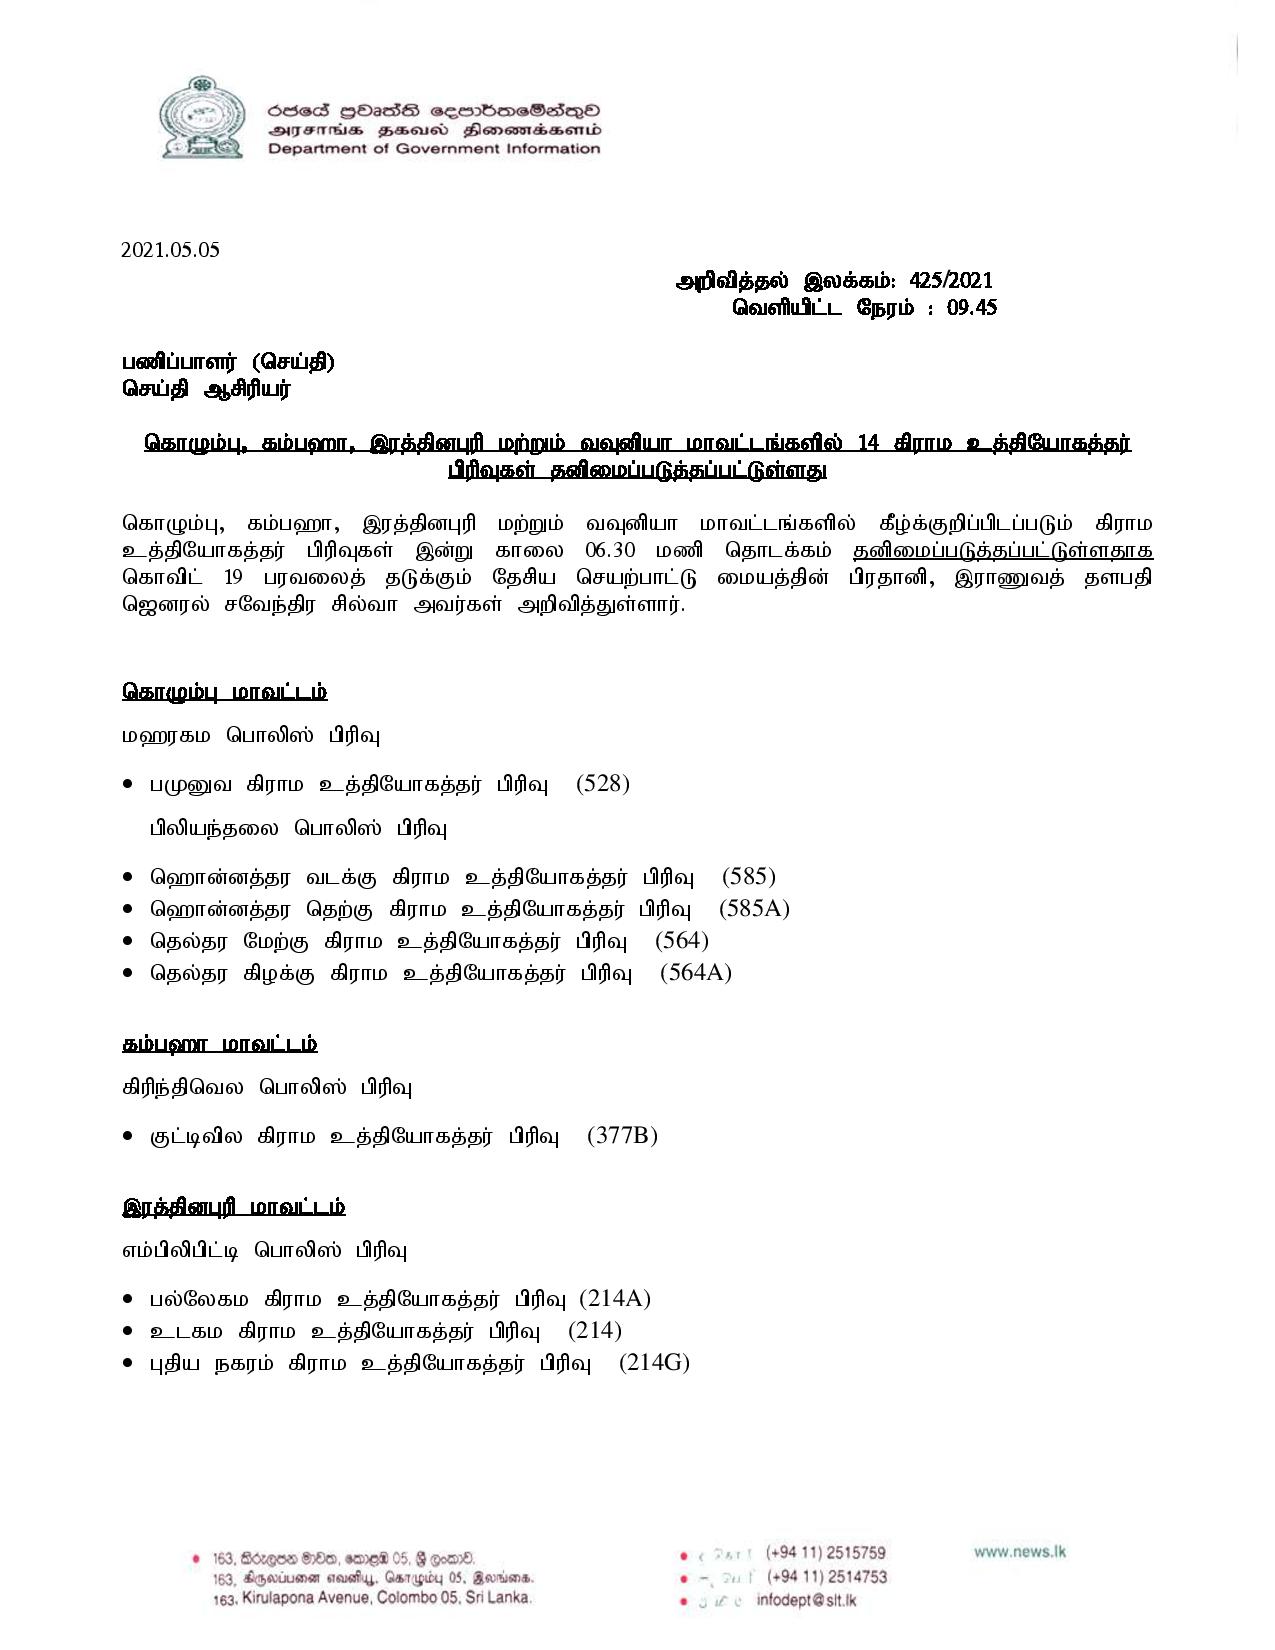 Release No 425 Tamil page 001